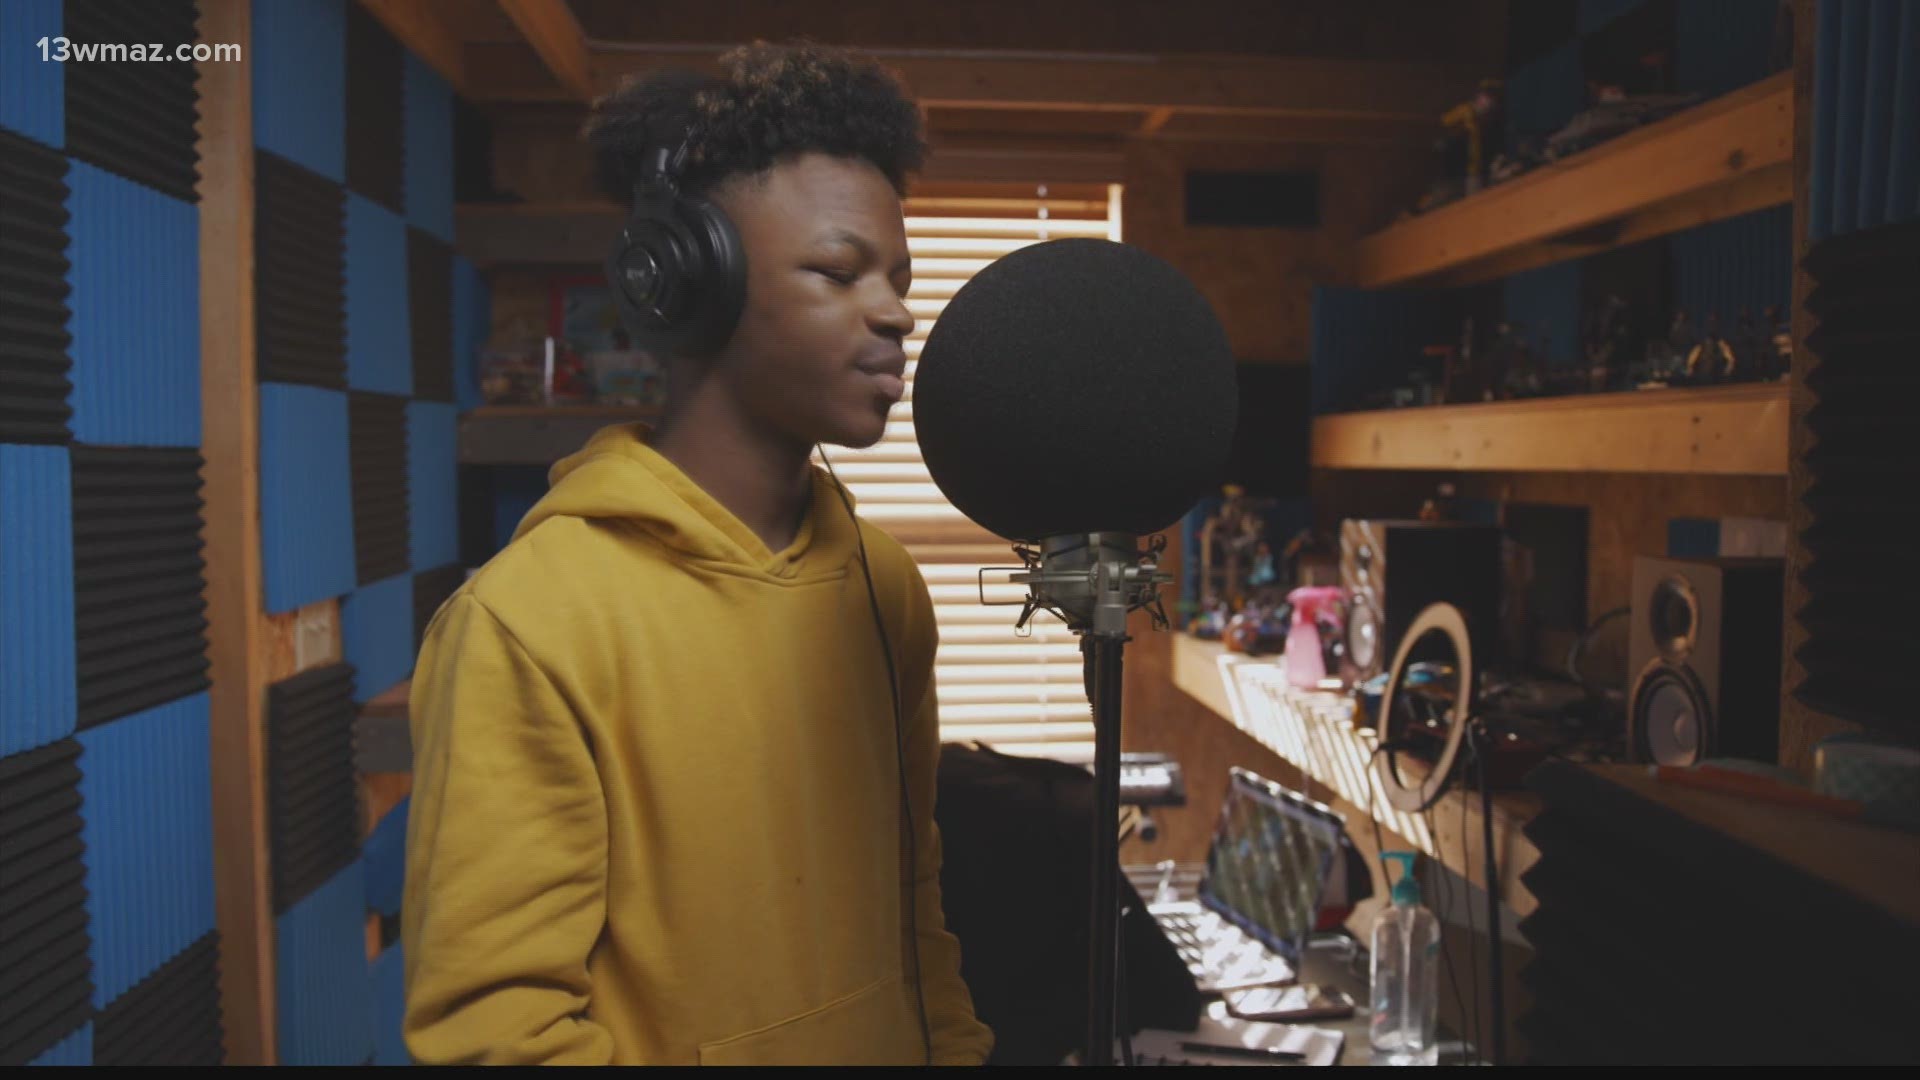 17-years-old Christopher Timothy is an artist performing under the name Prxphecy – using his lyrics to push conversations about race and inequality.